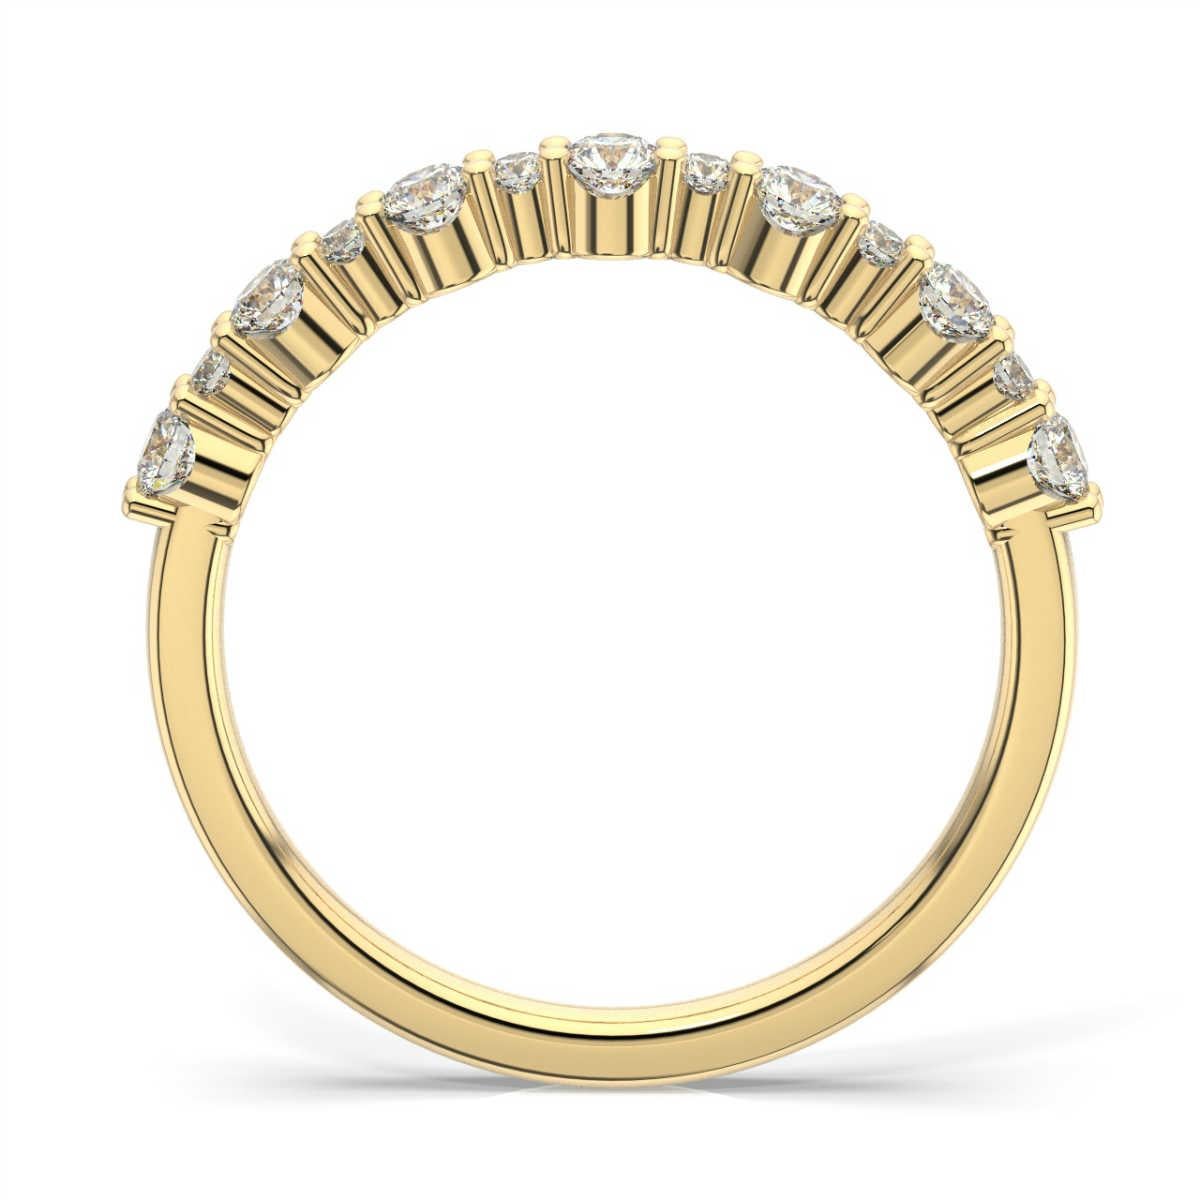 This Petite band features 13 alternating round brilliant diamonds. Experience the difference!

Product details: 

Center Gemstone Color: WHITE
Side Gemstone Type: NATURAL DIAMOND
Side Gemstone Shape: ROUND
Metal: 14K Yellow Gold
Metal Weight: